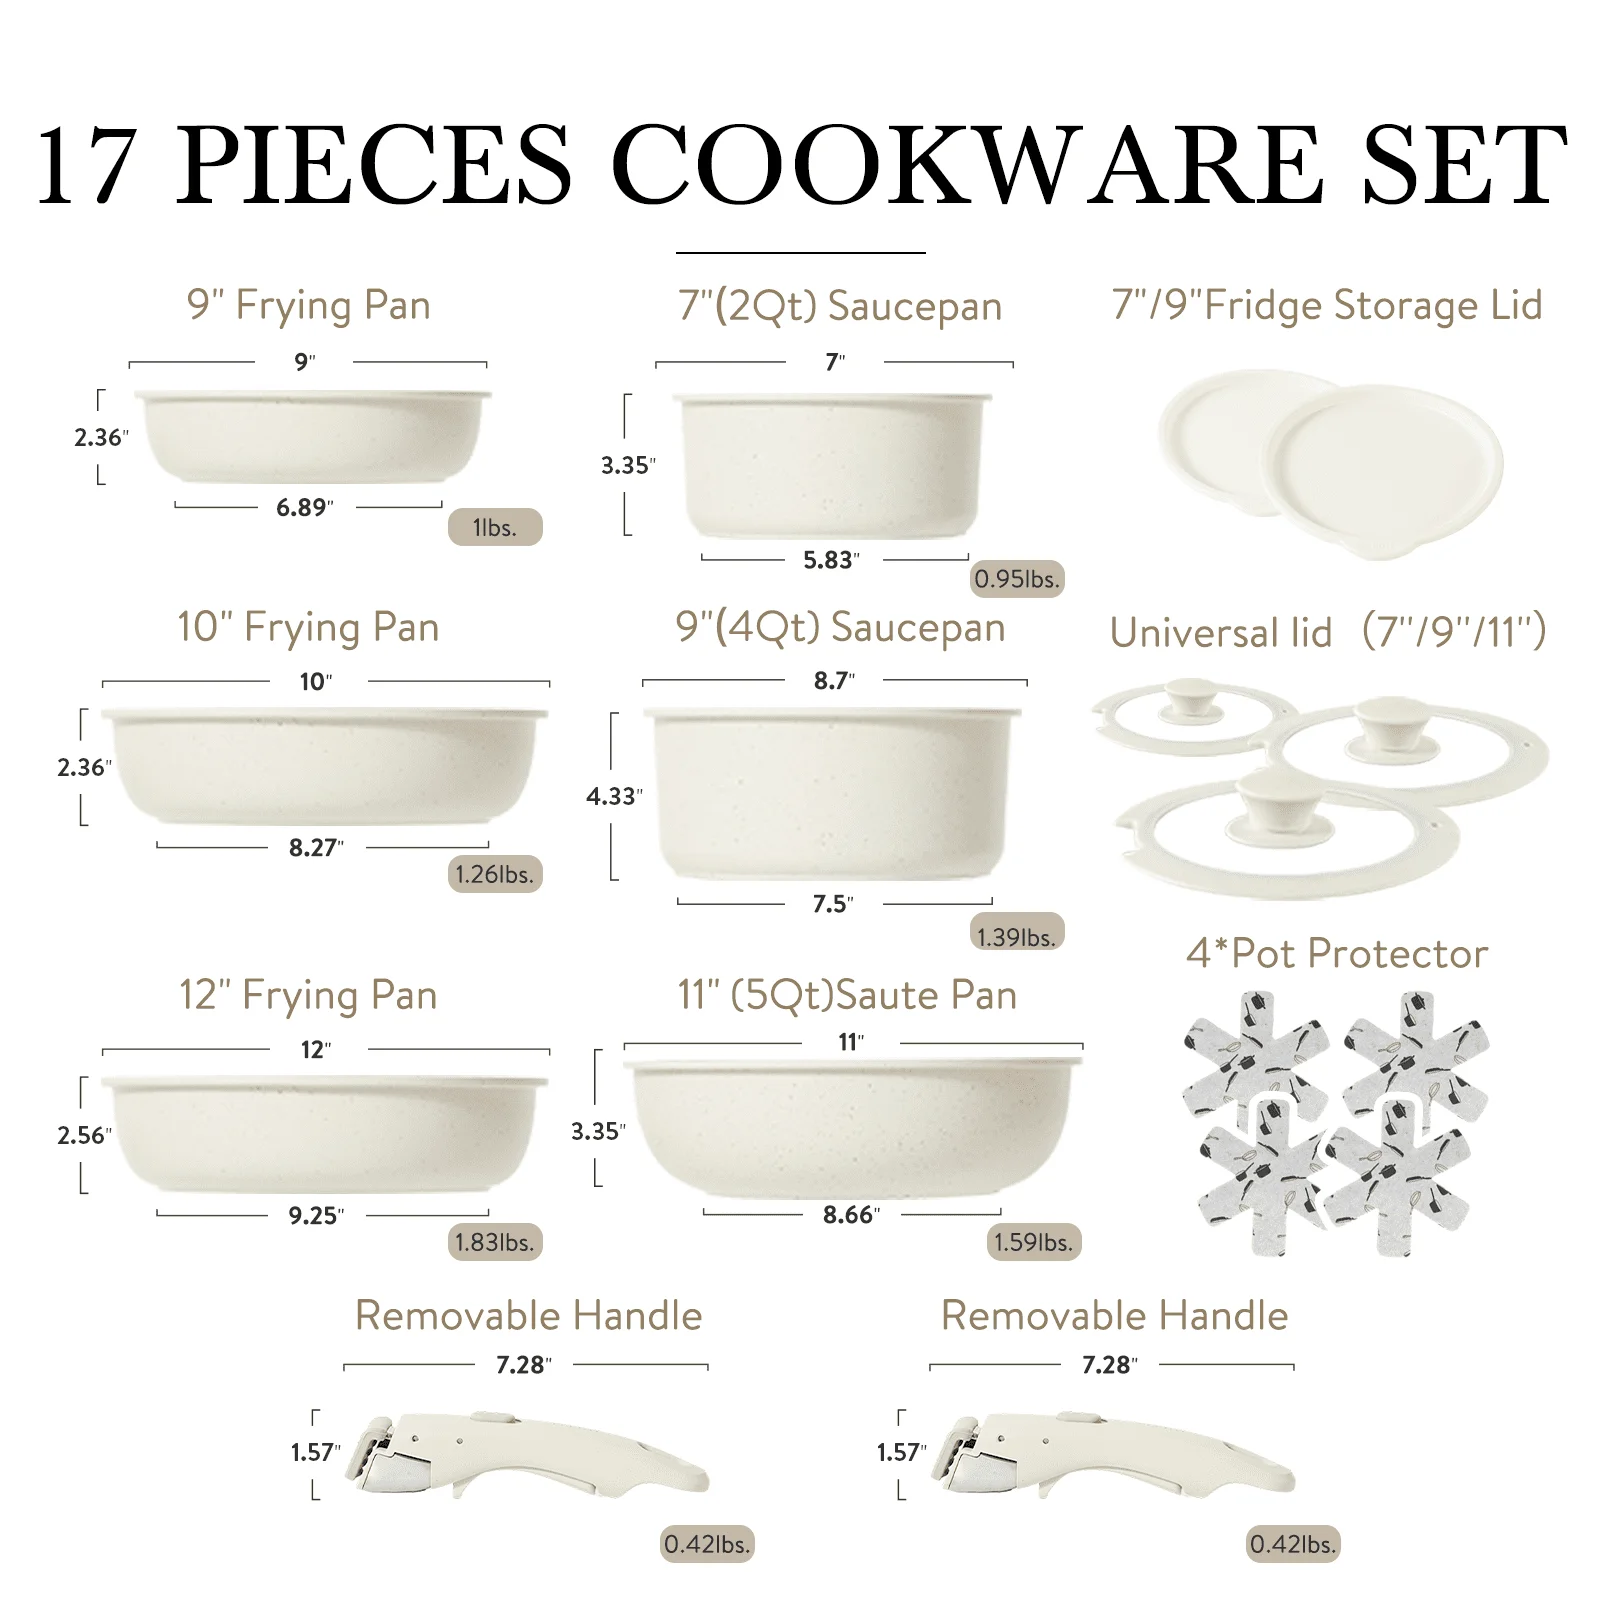 Carote Nonstick Cookware Sets with Detachable Handle, 5 Pcs Granite Non  Stick Pots and Pans Set with Removable Handle Cookware 